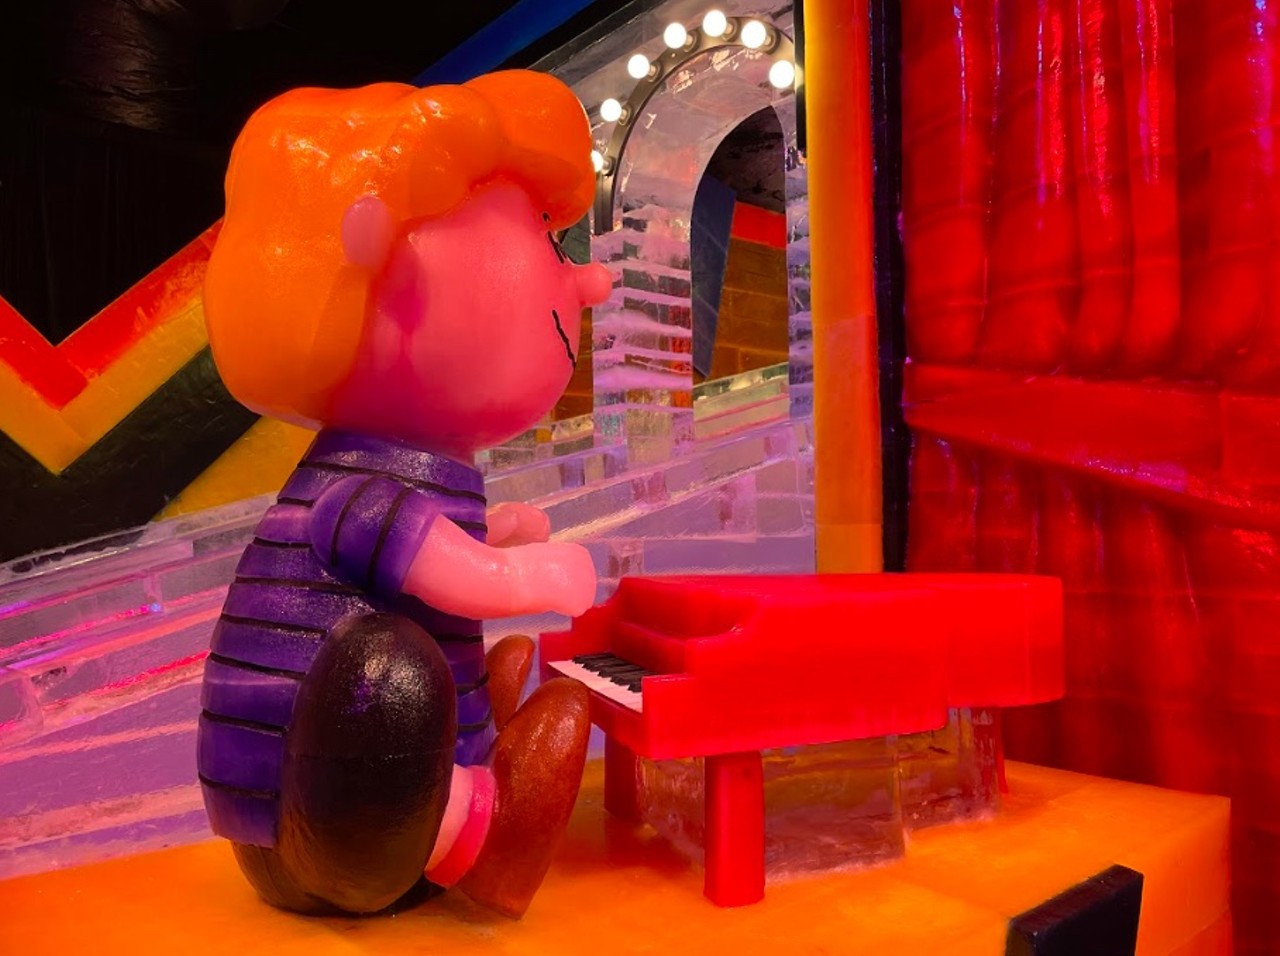 Photos: ICE offers chills and thrills in ‘A Charlie Brown Christmas’ at Gaylord Palms